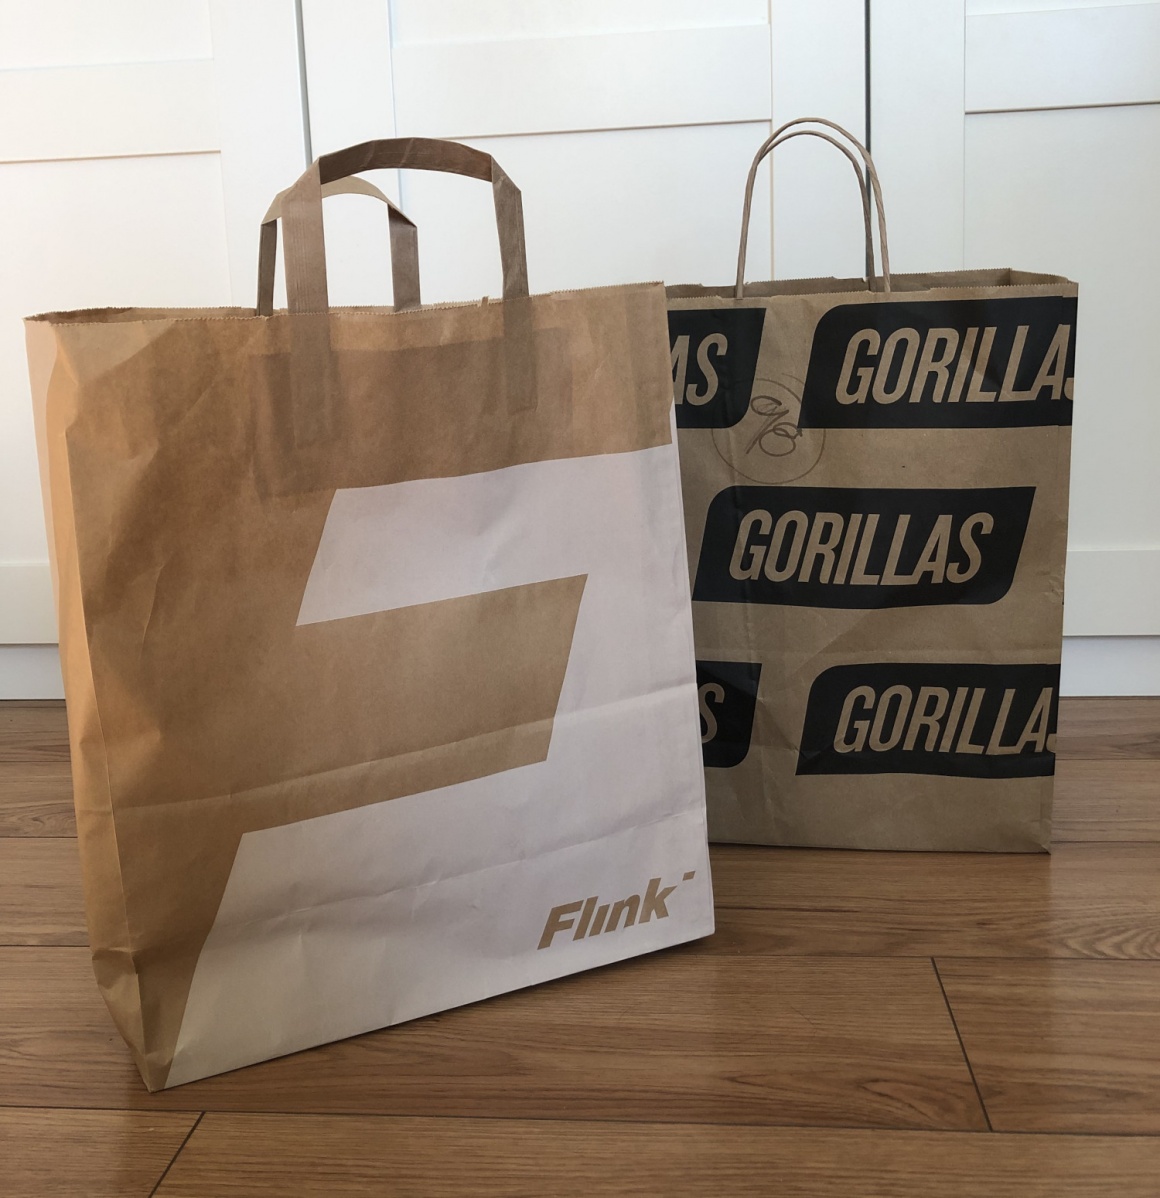 Two paper bags side by side, one from Flink, one from Gorillas...